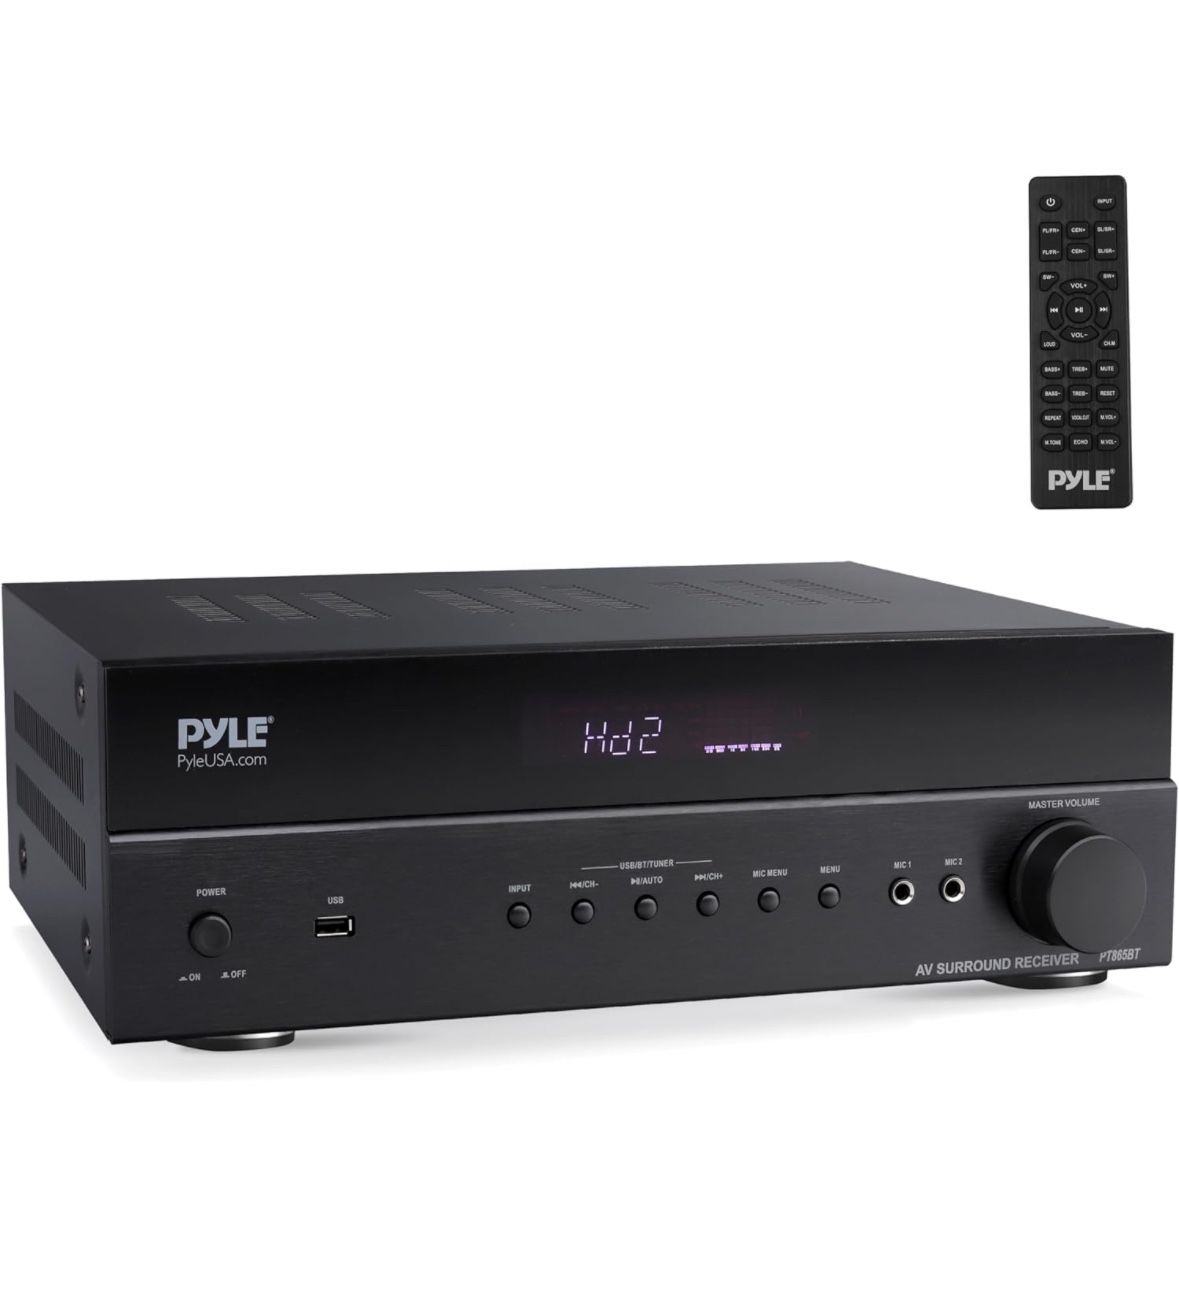 Pyle 5.2 Channel Hi-Fi Home Theater Receiver - 1000W MAX Wireless BT Surround Sound Stereo Amplifier System with 4k Ultra HD Support, MP3/USB/DAC/FM R